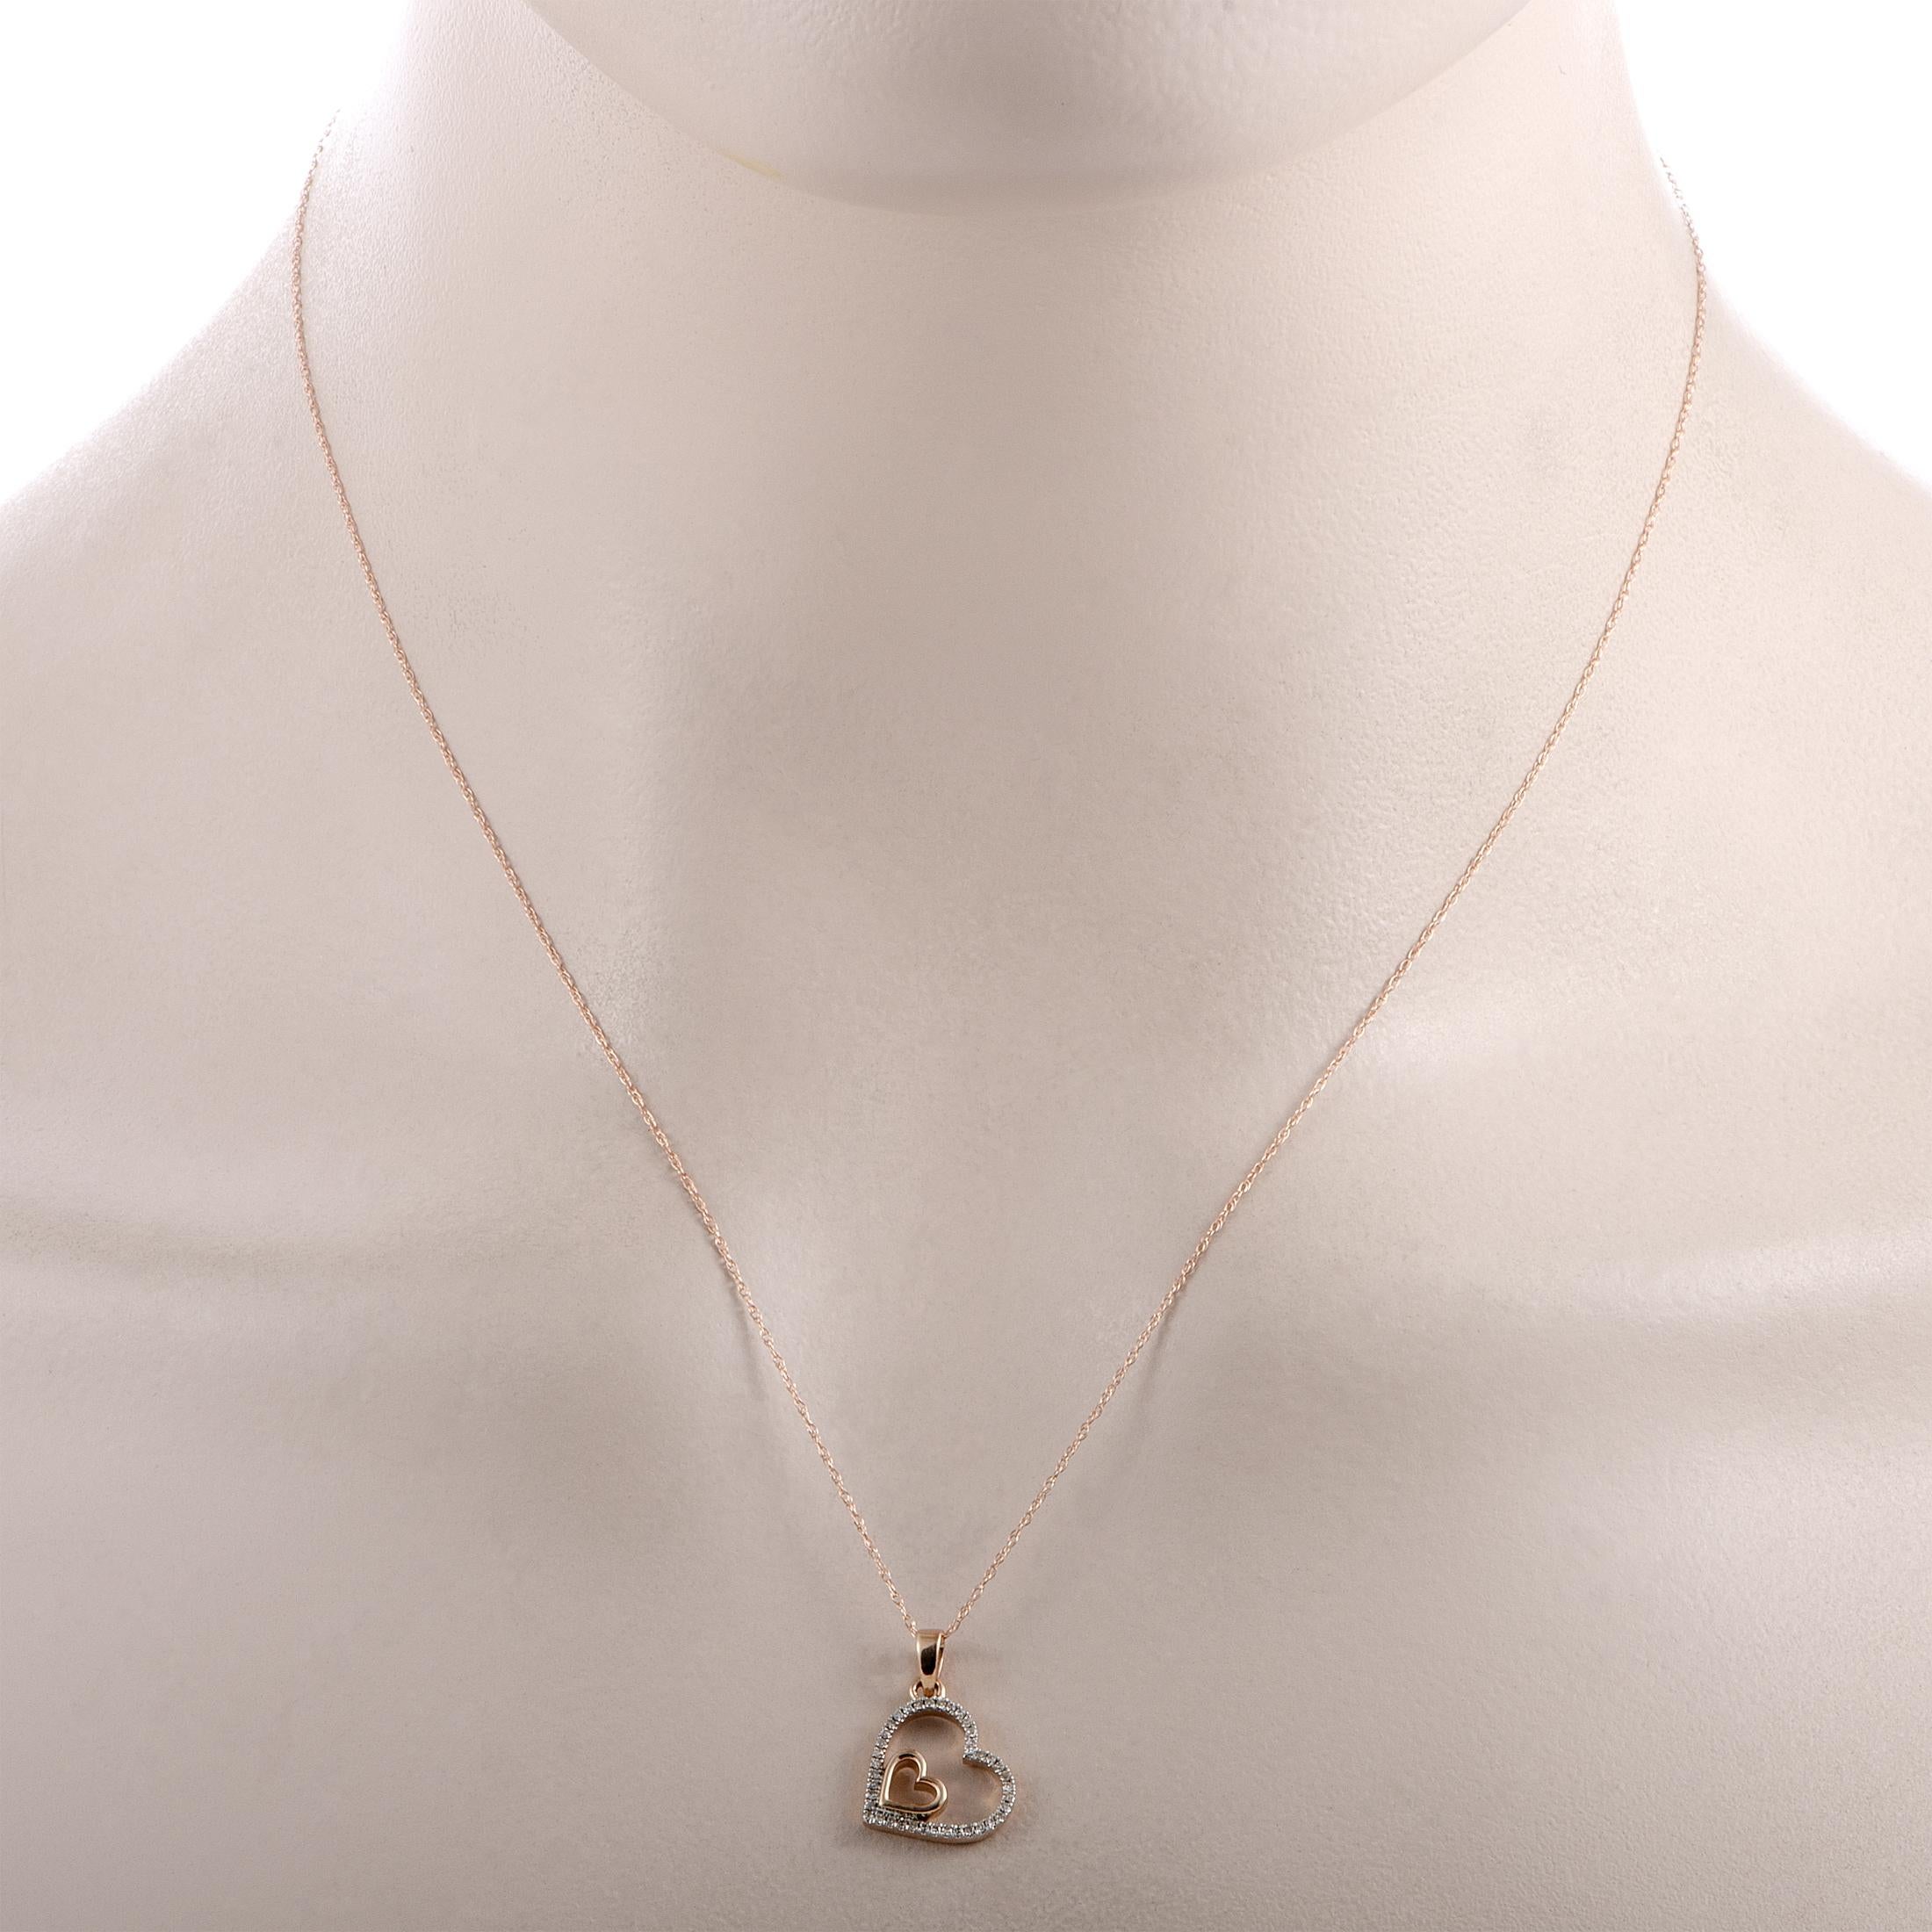 This necklace is crafted from 14K rose gold, boasting an 18.00” chain with spring ring closure and a heart pendant that measures 0.75” by 0.50”. The necklace weighs 1.7 grams and is set with a total of 0.08 carats of diamonds.
 
 Offered in brand